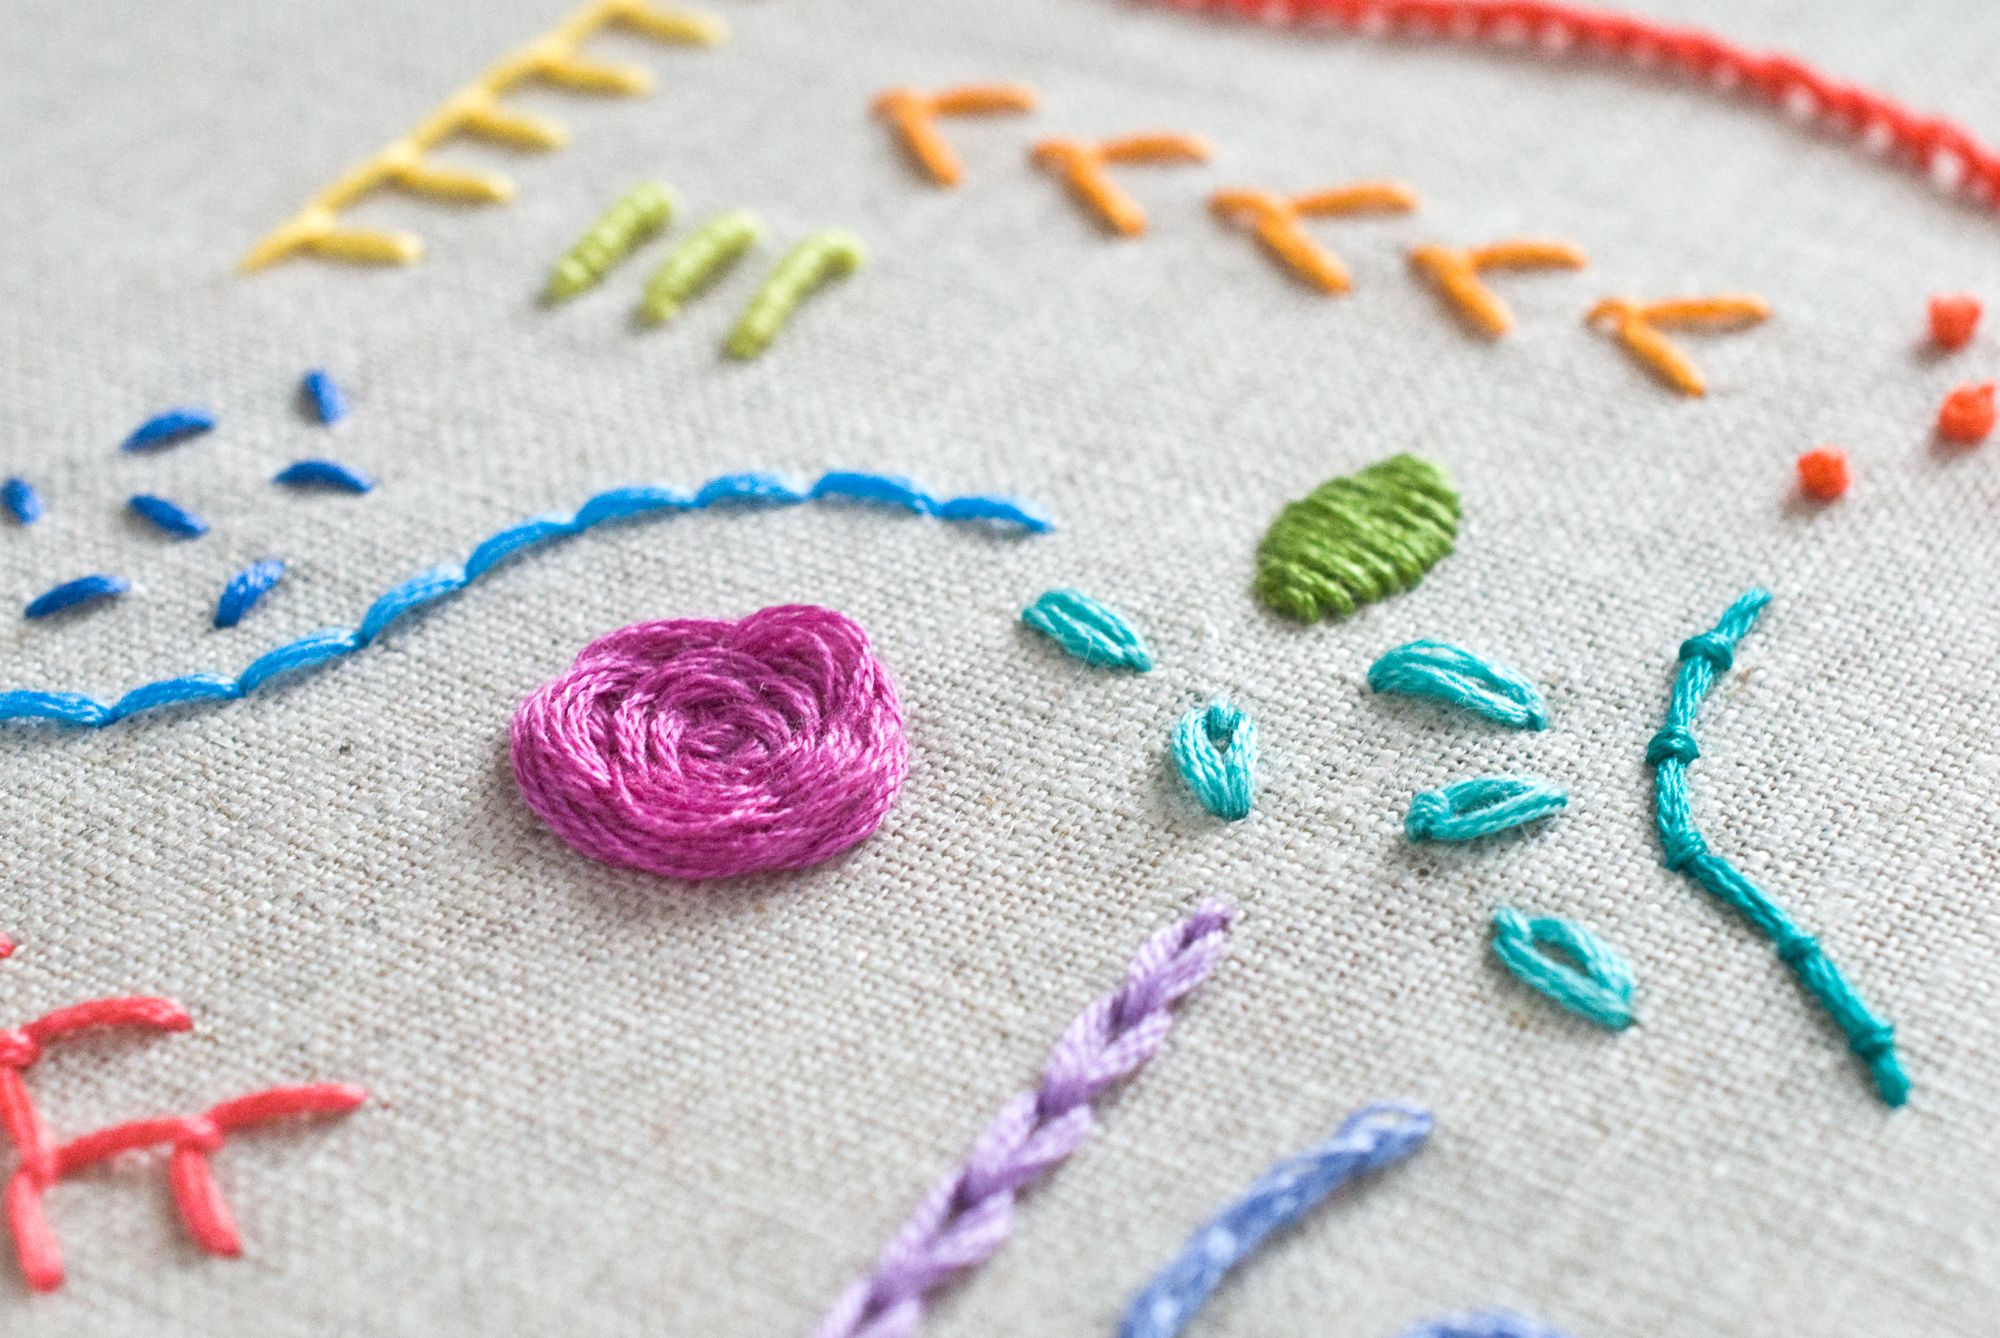 Design Your Own Embroidery Sampler